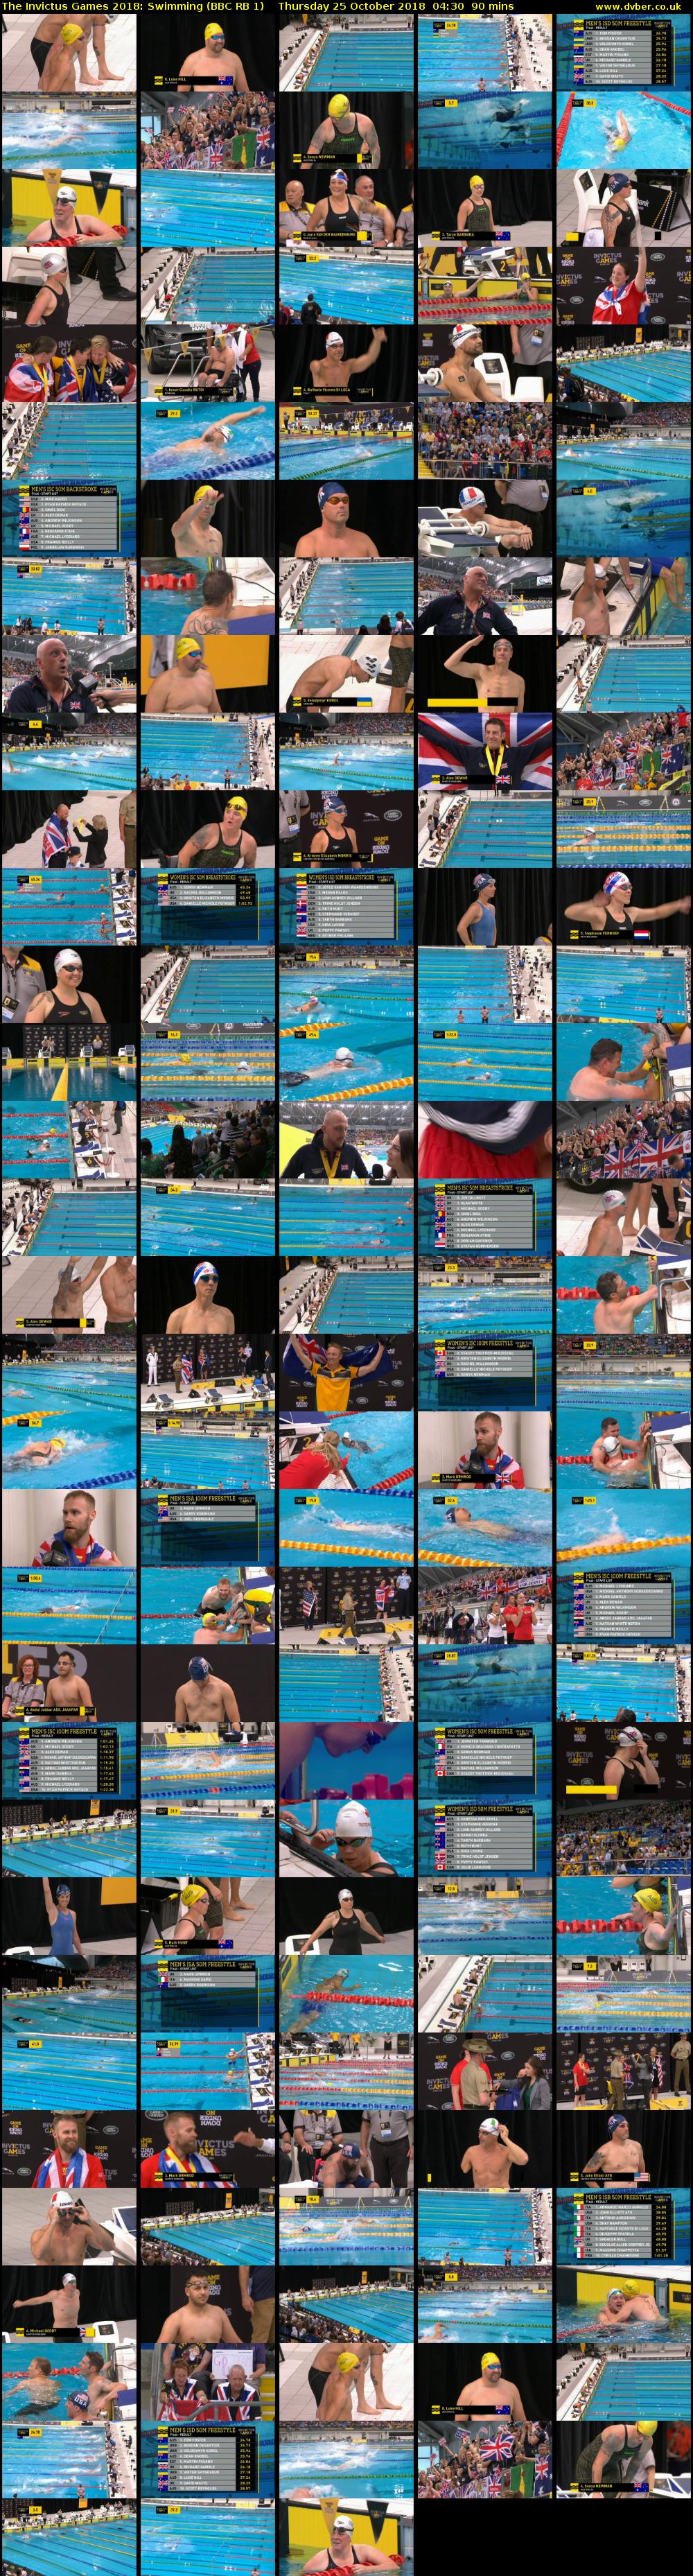 The Invictus Games 2018: Swimming (BBC RB 1) Thursday 25 October 2018 04:30 - 06:00